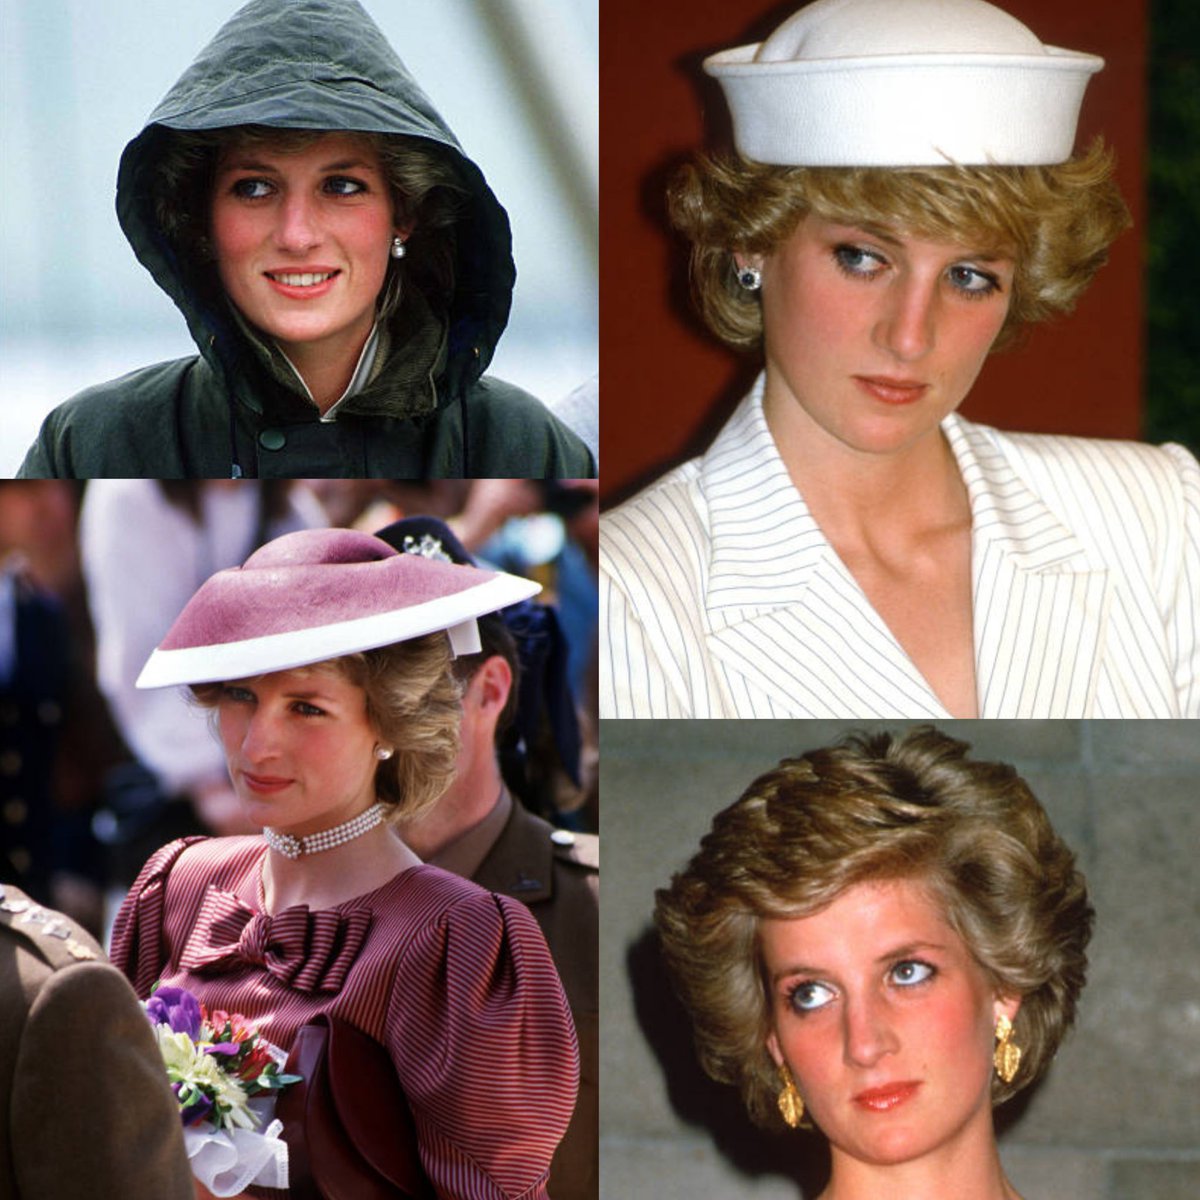 Prince Harry talking about Princess Lilibet's  Spencer Like features. 'I see a lot of my mom in Lili,' Harry said. 'She's very Spencer-like. She's got the same blue eyes.' #HarryandMeganNetflix 

Diana, Princess of Wales was killed in Paris, France on August 31, 1997.